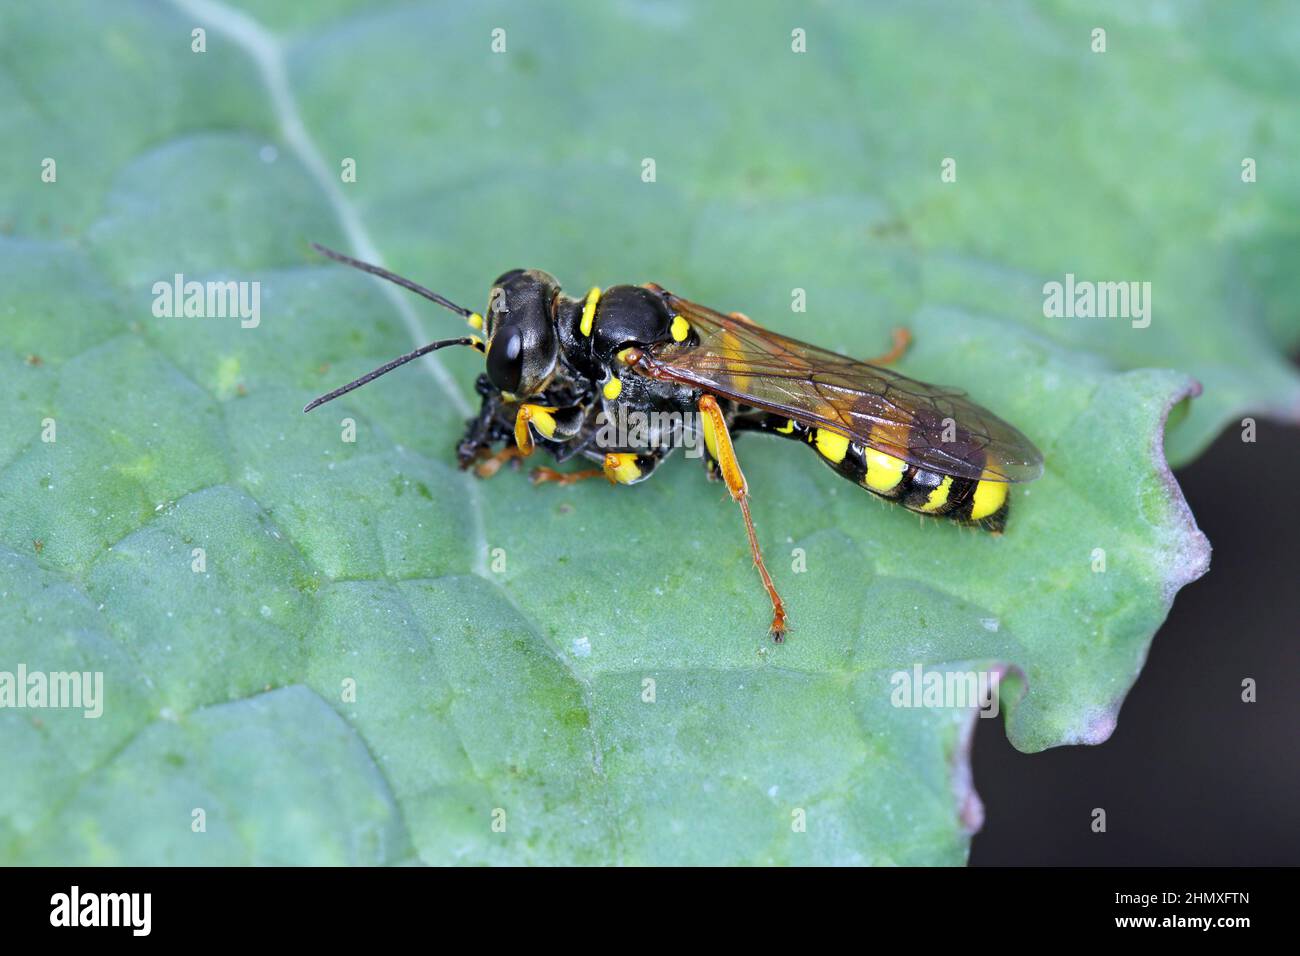 A wild wasp with a hunted insect. Stock Photo